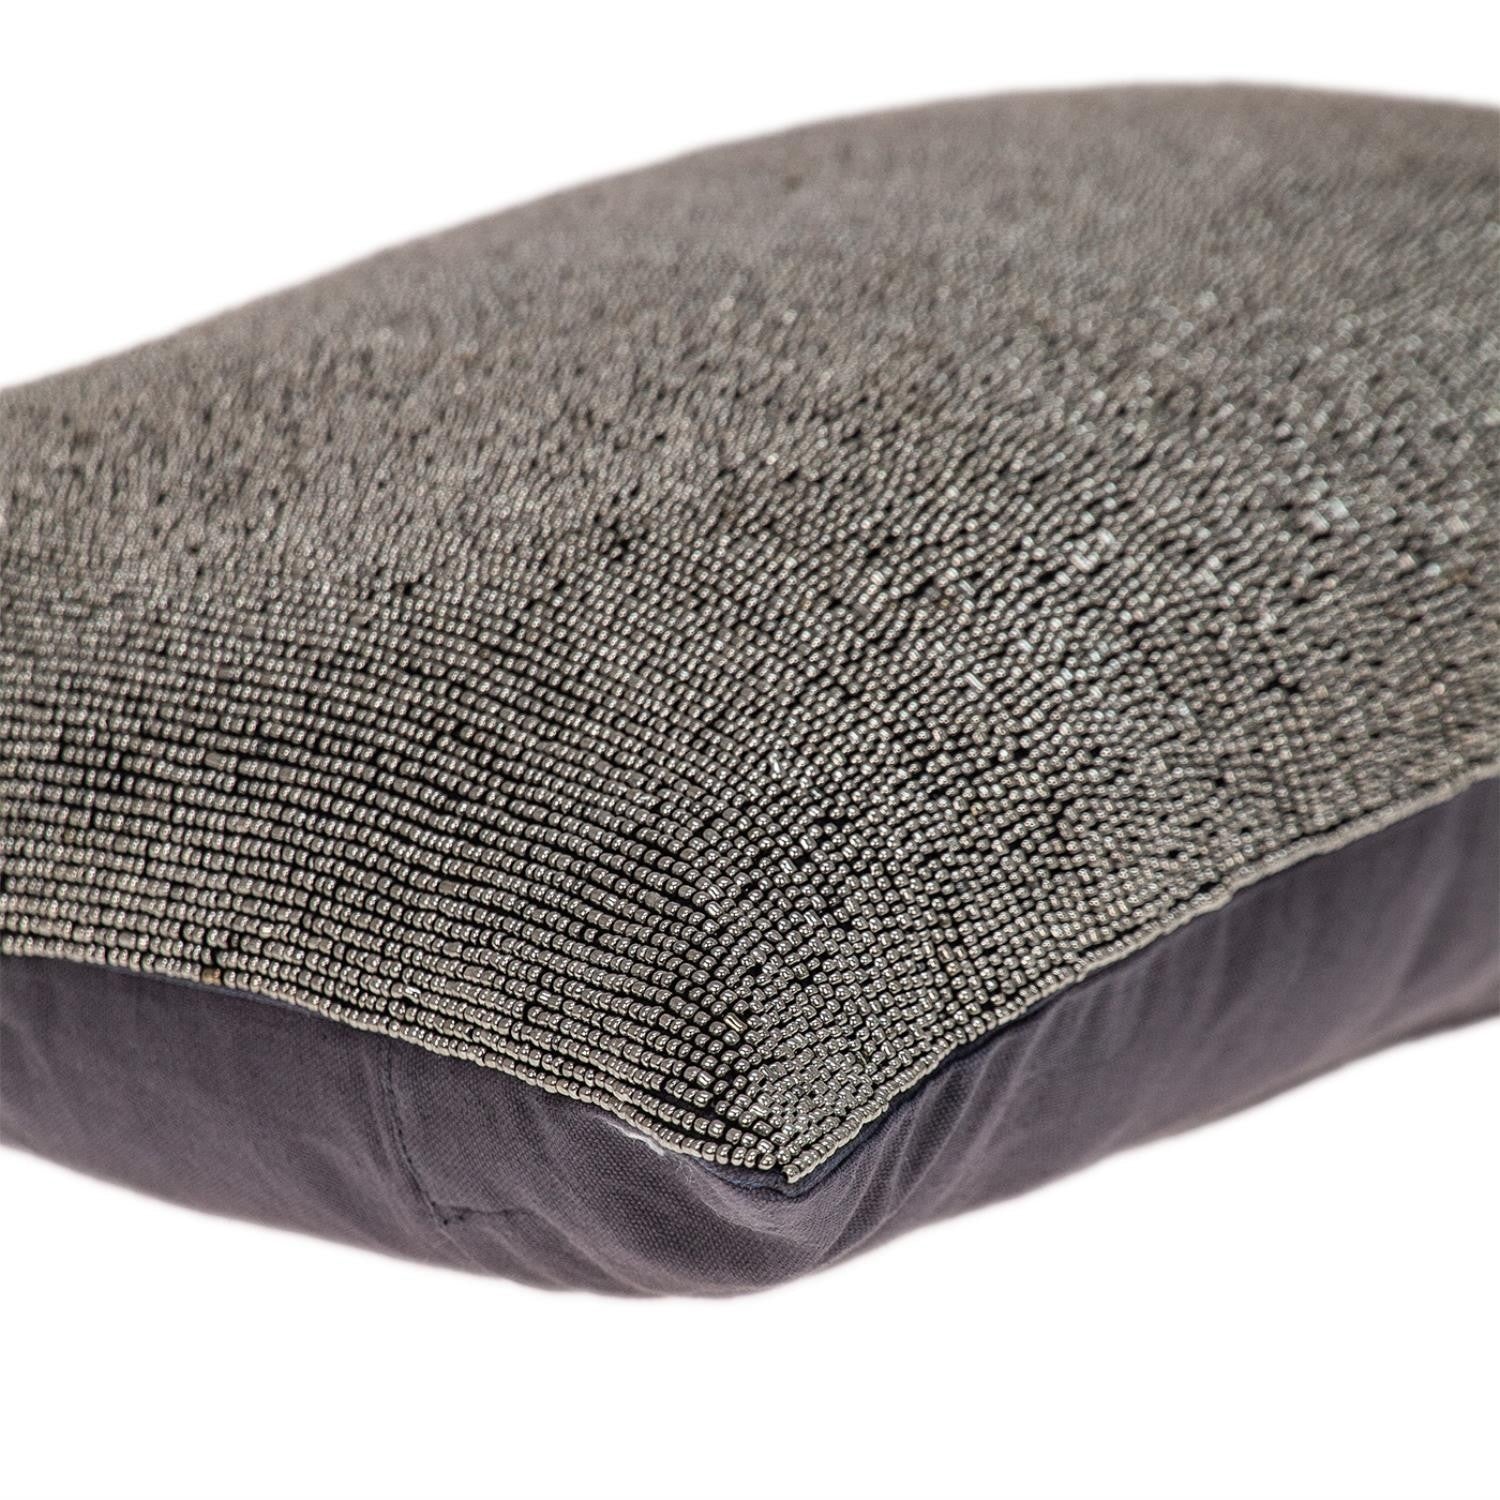 Shimmering Gray Beaded Luxury Throw Pillow